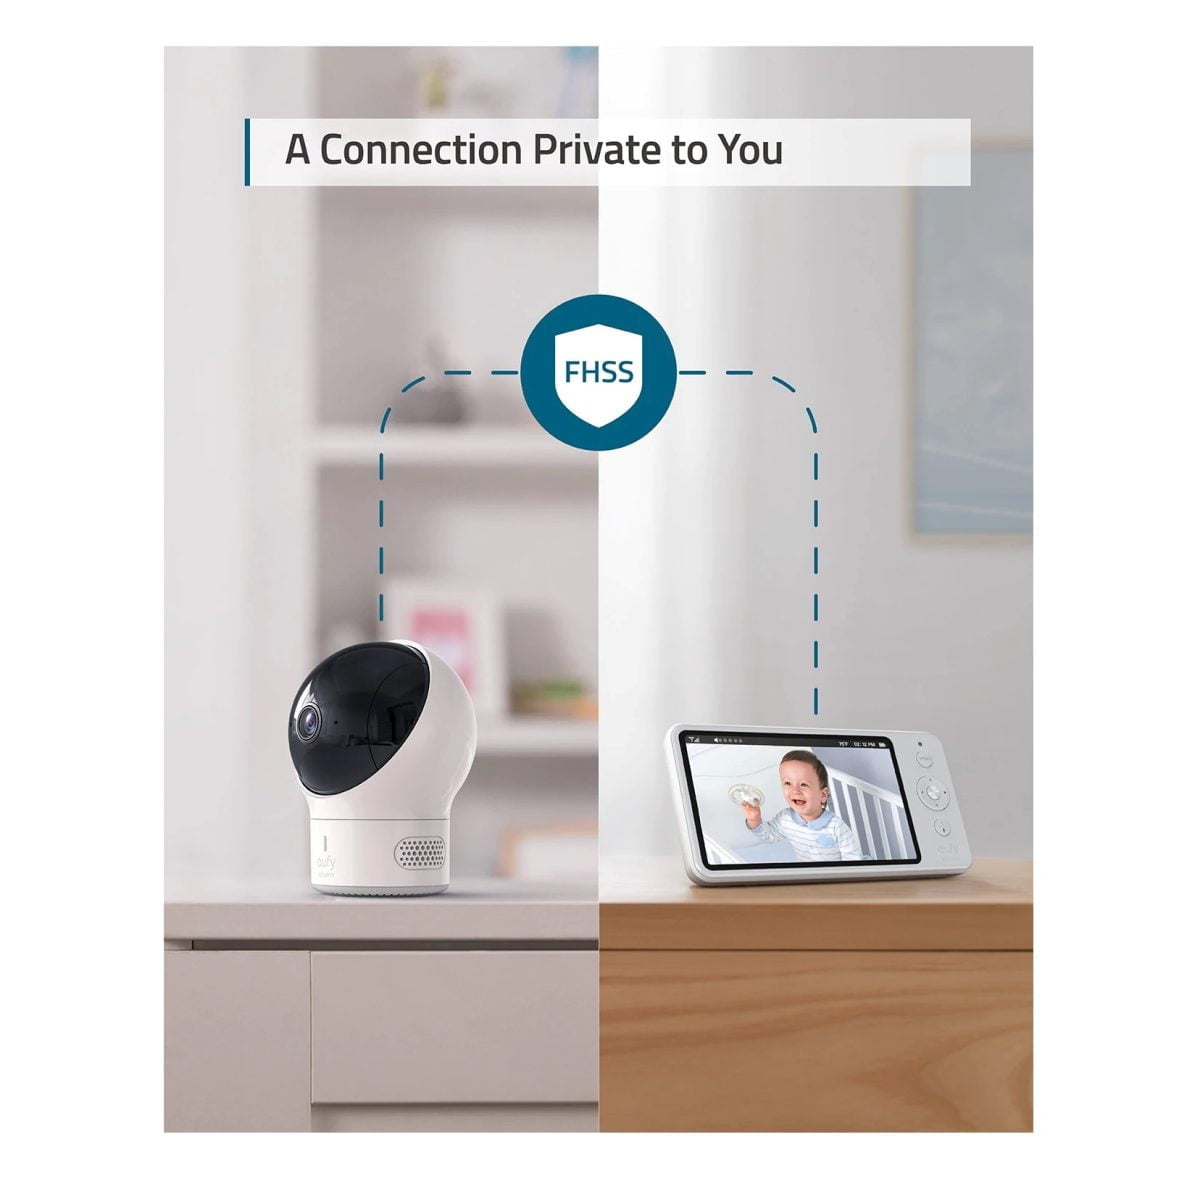 Eufy &Lt;H1&Gt;Eufy Spaceview Baby Monitor&Lt;/H1&Gt; Https://Www.youtube.com/Watch?V=2Exedt1-Rsc &Lt;Ul Class=&Quot;A-Unordered-List A-Vertical A-Spacing-Mini&Quot;&Gt; &Lt;Li&Gt;&Lt;Span Class=&Quot;A-List-Item&Quot;&Gt;&Lt;Strong&Gt;Sweet Dreams On The Big Screen&Lt;/Strong&Gt;: The Large 5&Quot; 720P Video Baby Monitor Display Shows A Sharp Picture With 10 Times More Detail Than Ordinary 240P-Display Baby Monitors.&Lt;/Span&Gt;&Lt;/Li&Gt; &Lt;Li&Gt;&Lt;Span Class=&Quot;A-List-Item&Quot;&Gt;&Lt;Strong&Gt;Ready For Their First Steps&Lt;/Strong&Gt;: When Your Baby Starts To Walk And Run Around, Just Attach The Included Lens To Expand The View To 110 Degrees. No Need To Purchase Another Lens.&Lt;/Span&Gt;&Lt;/Li&Gt; &Lt;Li&Gt;&Lt;Span Class=&Quot;A-List-Item&Quot;&Gt;&Lt;Strong&Gt;Pan From Pillow To Pinky Toes&Lt;/Strong&Gt;: Pan The Lens 330° To See Corner-To-Corner And Tilt 110° To See Floor To Ceiling.&Lt;/Span&Gt;&Lt;/Li&Gt; &Lt;Li&Gt;&Lt;Span Class=&Quot;A-List-Item&Quot;&Gt;&Lt;Strong&Gt;Instant Alerts&Lt;/Strong&Gt;: Get Alerted Immediately From The Video Baby Monitor When Your Baby Is Crying, Even When You'Re Sleeping.&Lt;/Span&Gt;&Lt;/Li&Gt; &Lt;Li&Gt;&Lt;Span Class=&Quot;A-List-Item&Quot;&Gt;&Lt;Strong&Gt;Mobile&Lt;/Strong&Gt;: The 460Ft - 1000Ft Range-Coverage Area Allows You To Watch Your Little One Rest Peacefully In Real-Time Wherever You Are In Your Home. Note: Supports 1000Ft Max. In An Open Area. Notice：micro Sd Card Is Not Supported.&Lt;/Span&Gt;&Lt;/Li&Gt; &Lt;/Ul&Gt; Baby Monitor Eufy Spaceview Baby Monitor T83002D3